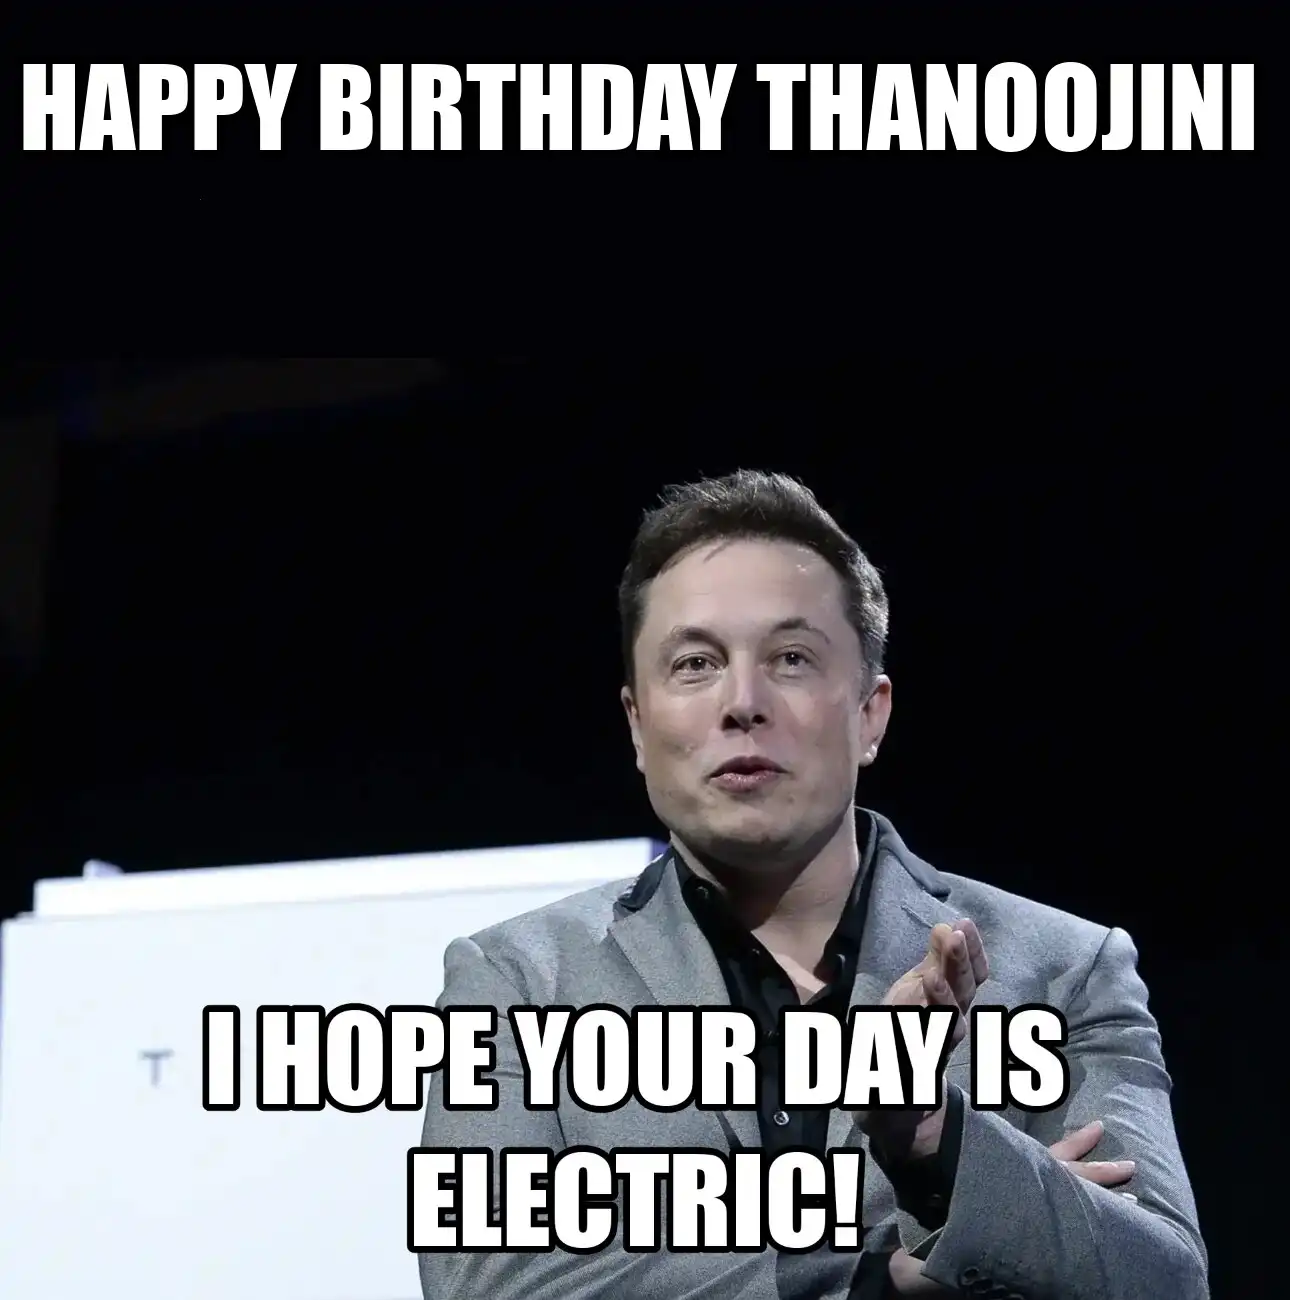 Happy Birthday Thanoojini I Hope Your Day Is Electric Meme